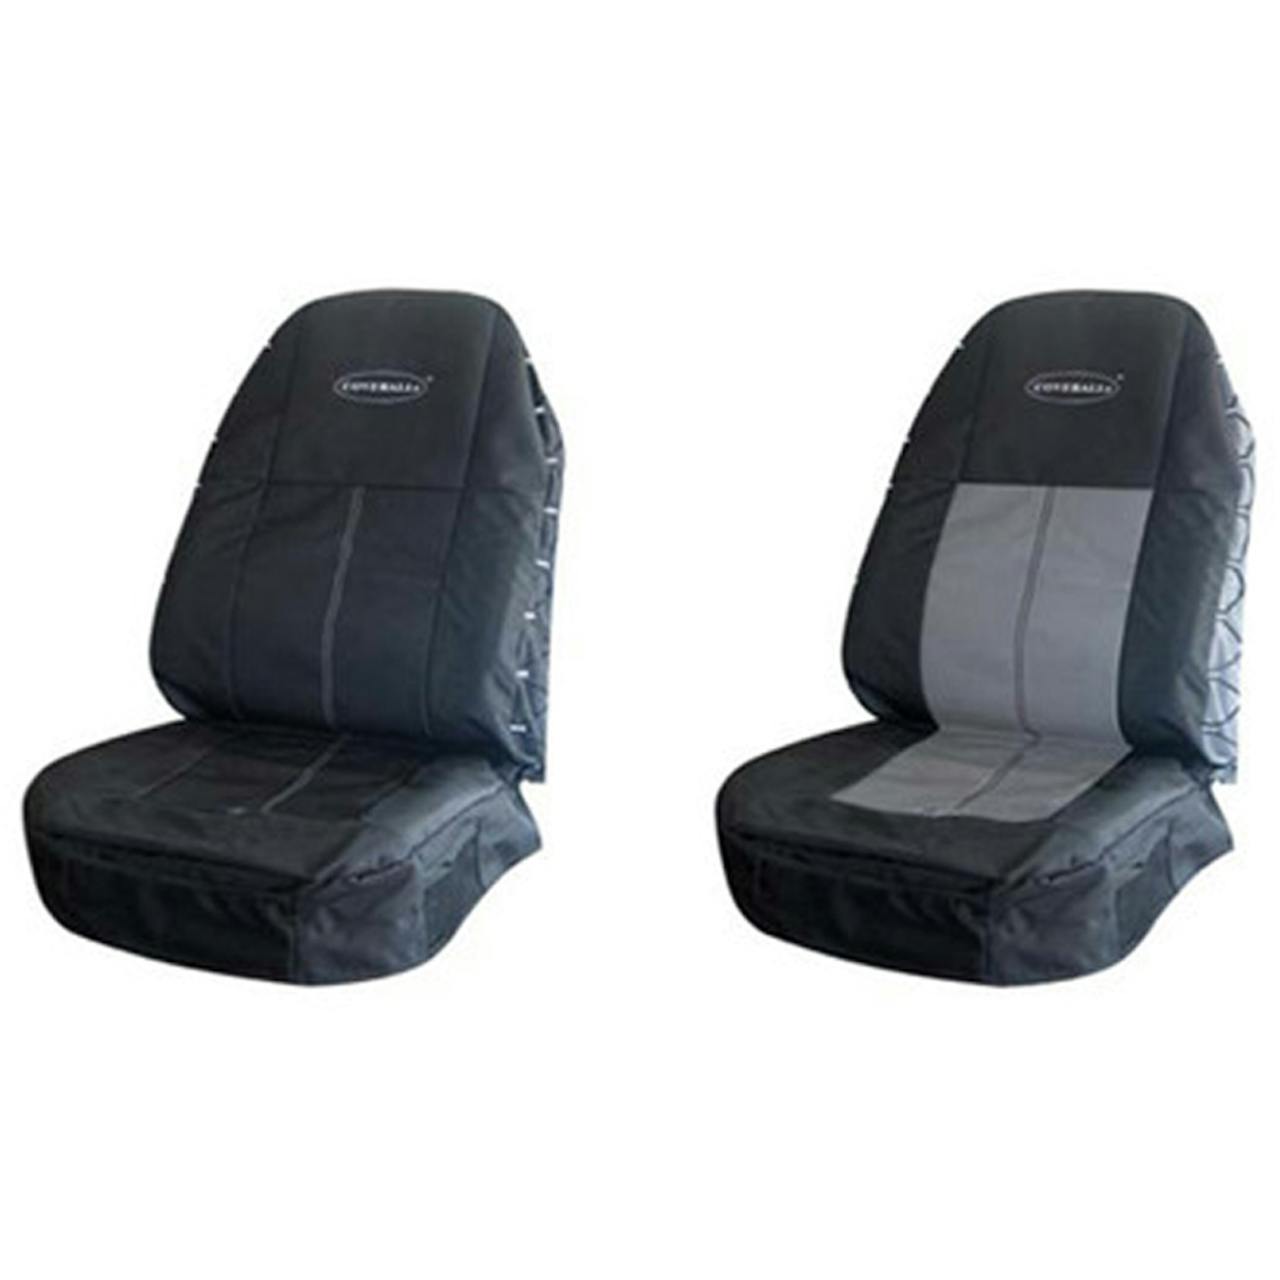 How To Choose a Semi-Truck Seat Cover